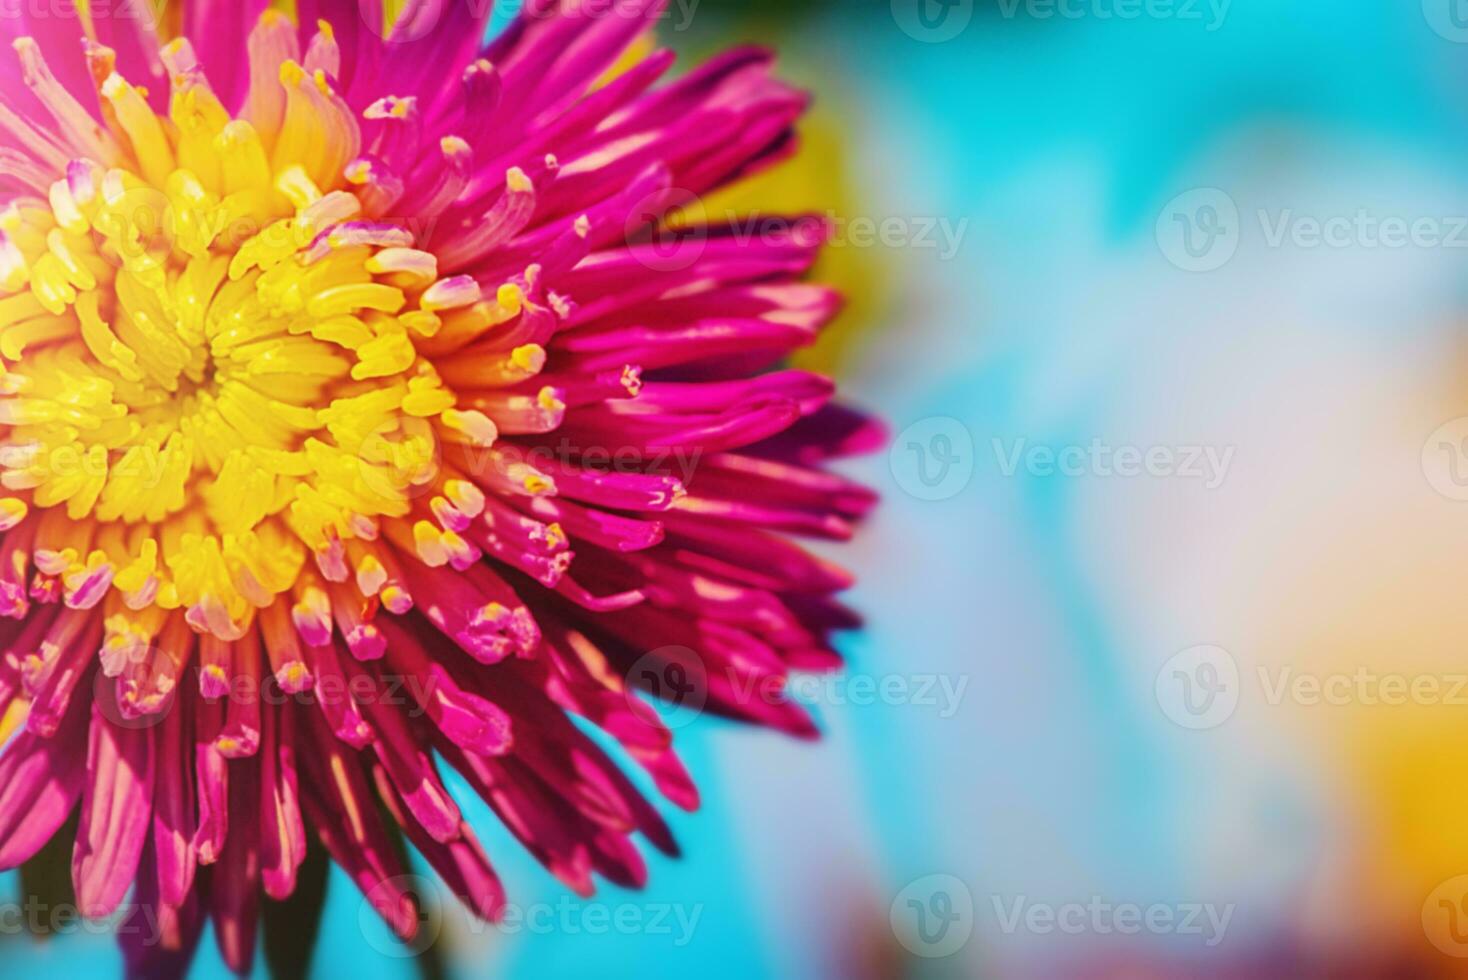 Yellow and pink aster on a blue background. Macro photo of a flower in sunlight.